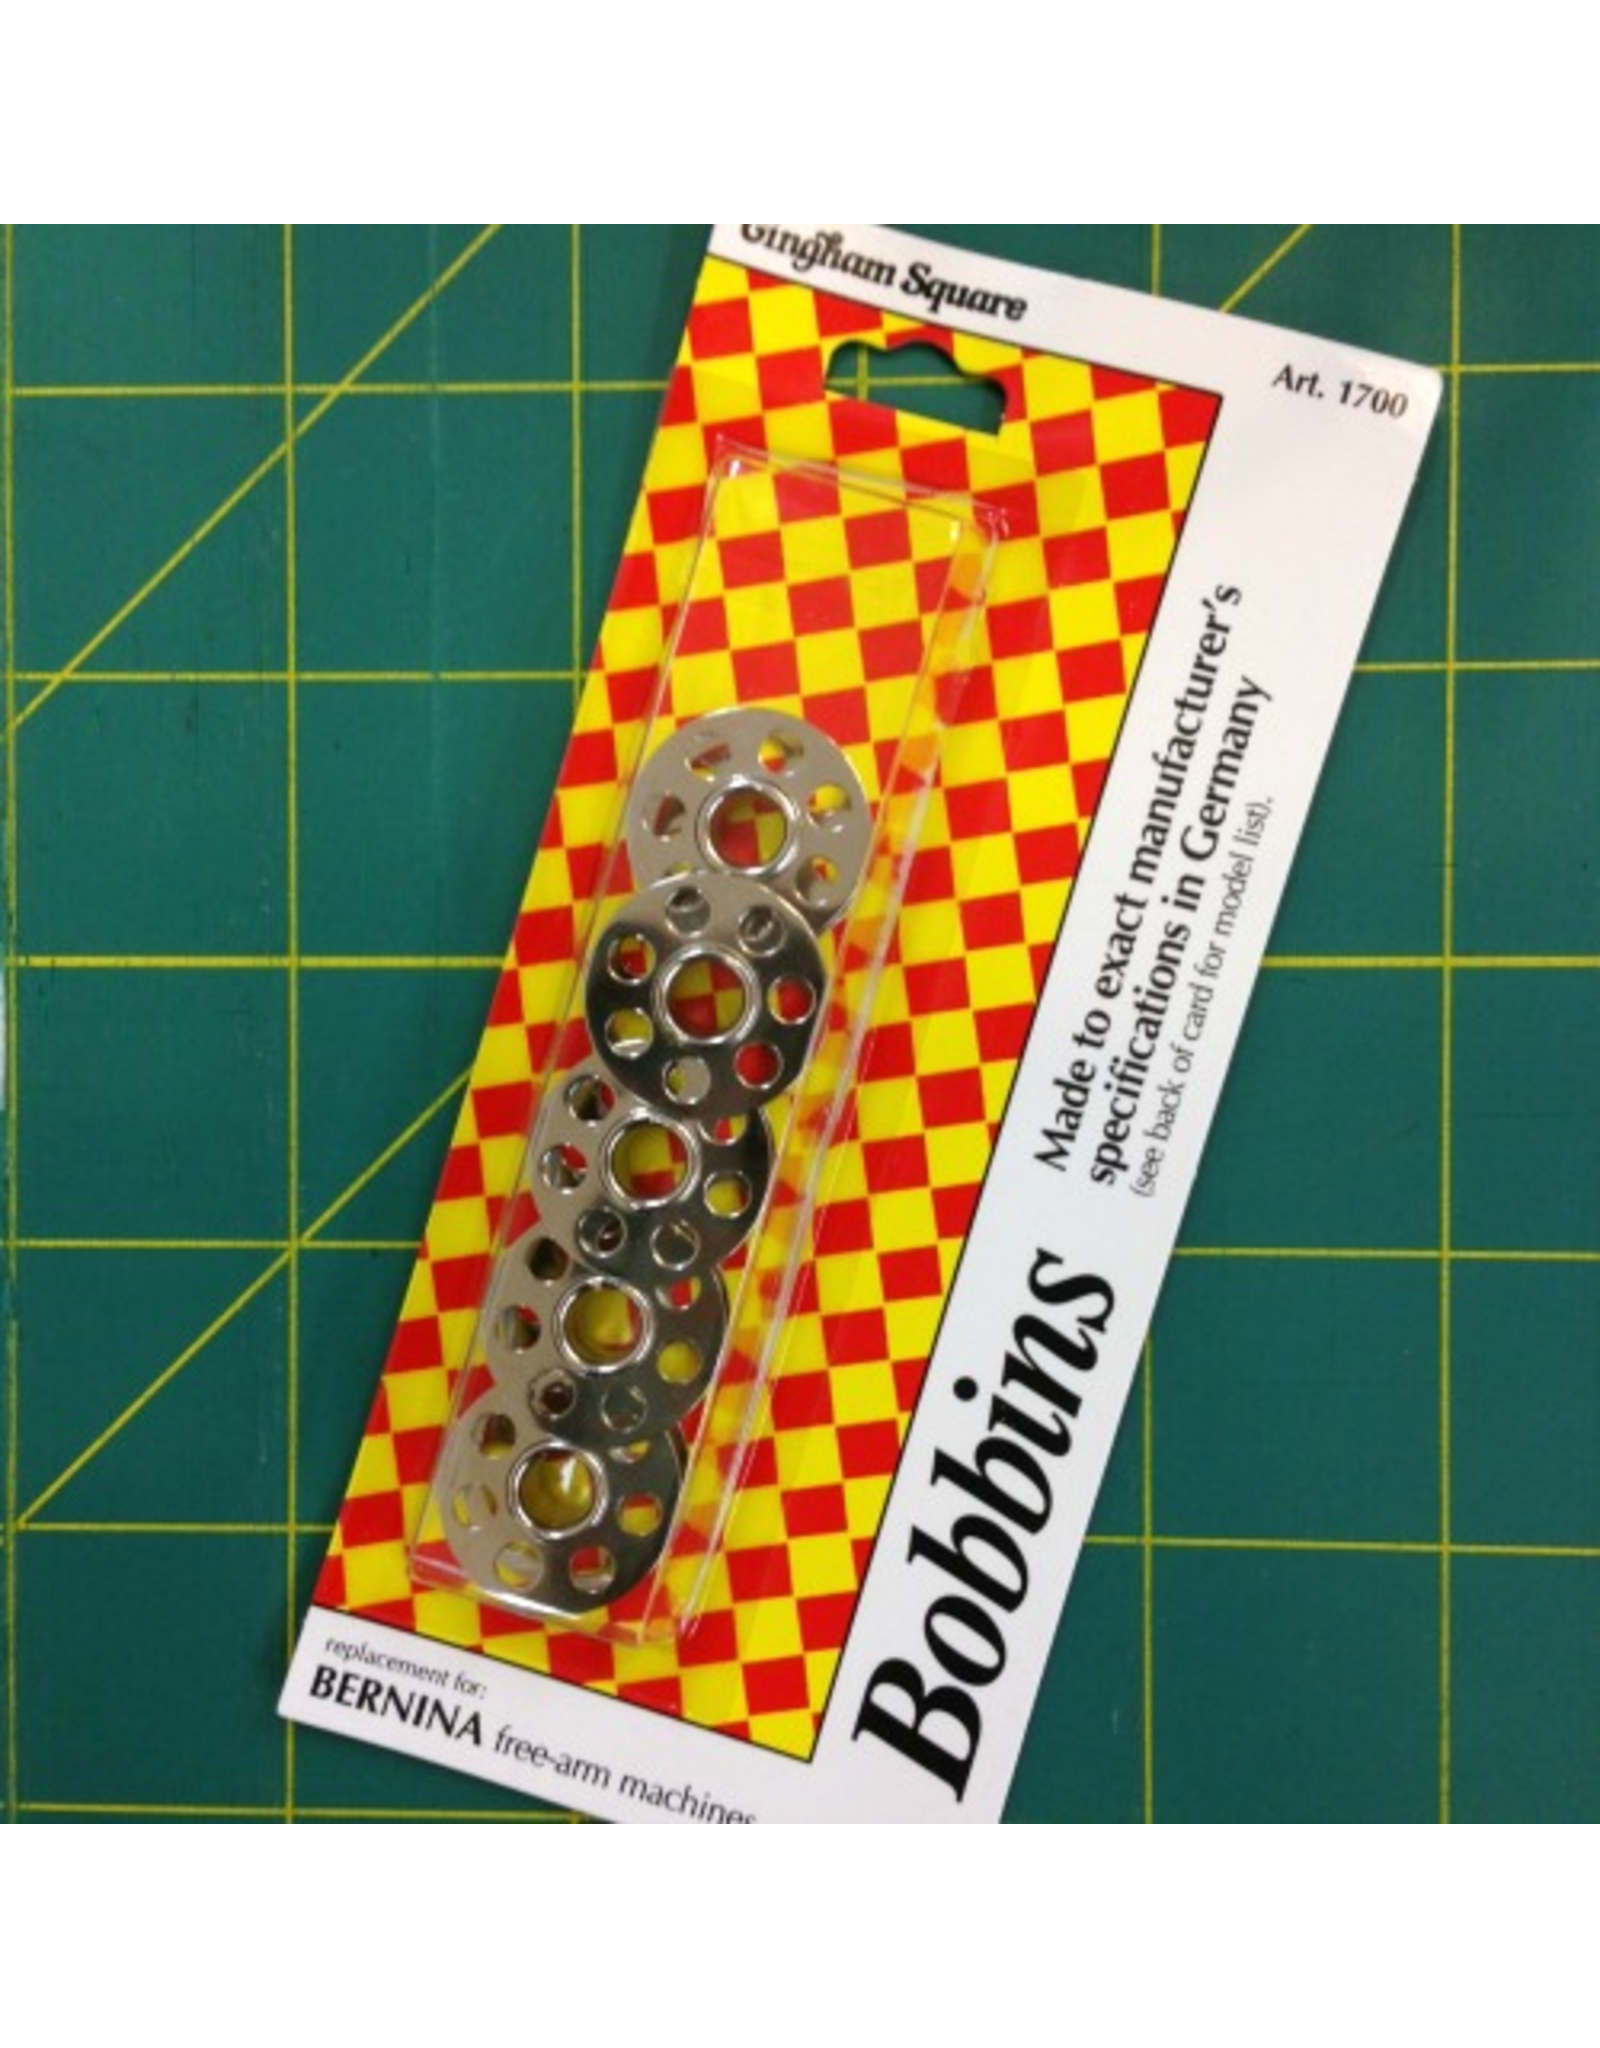 PD Bernina Bobbins by Gingham Square - 5 count